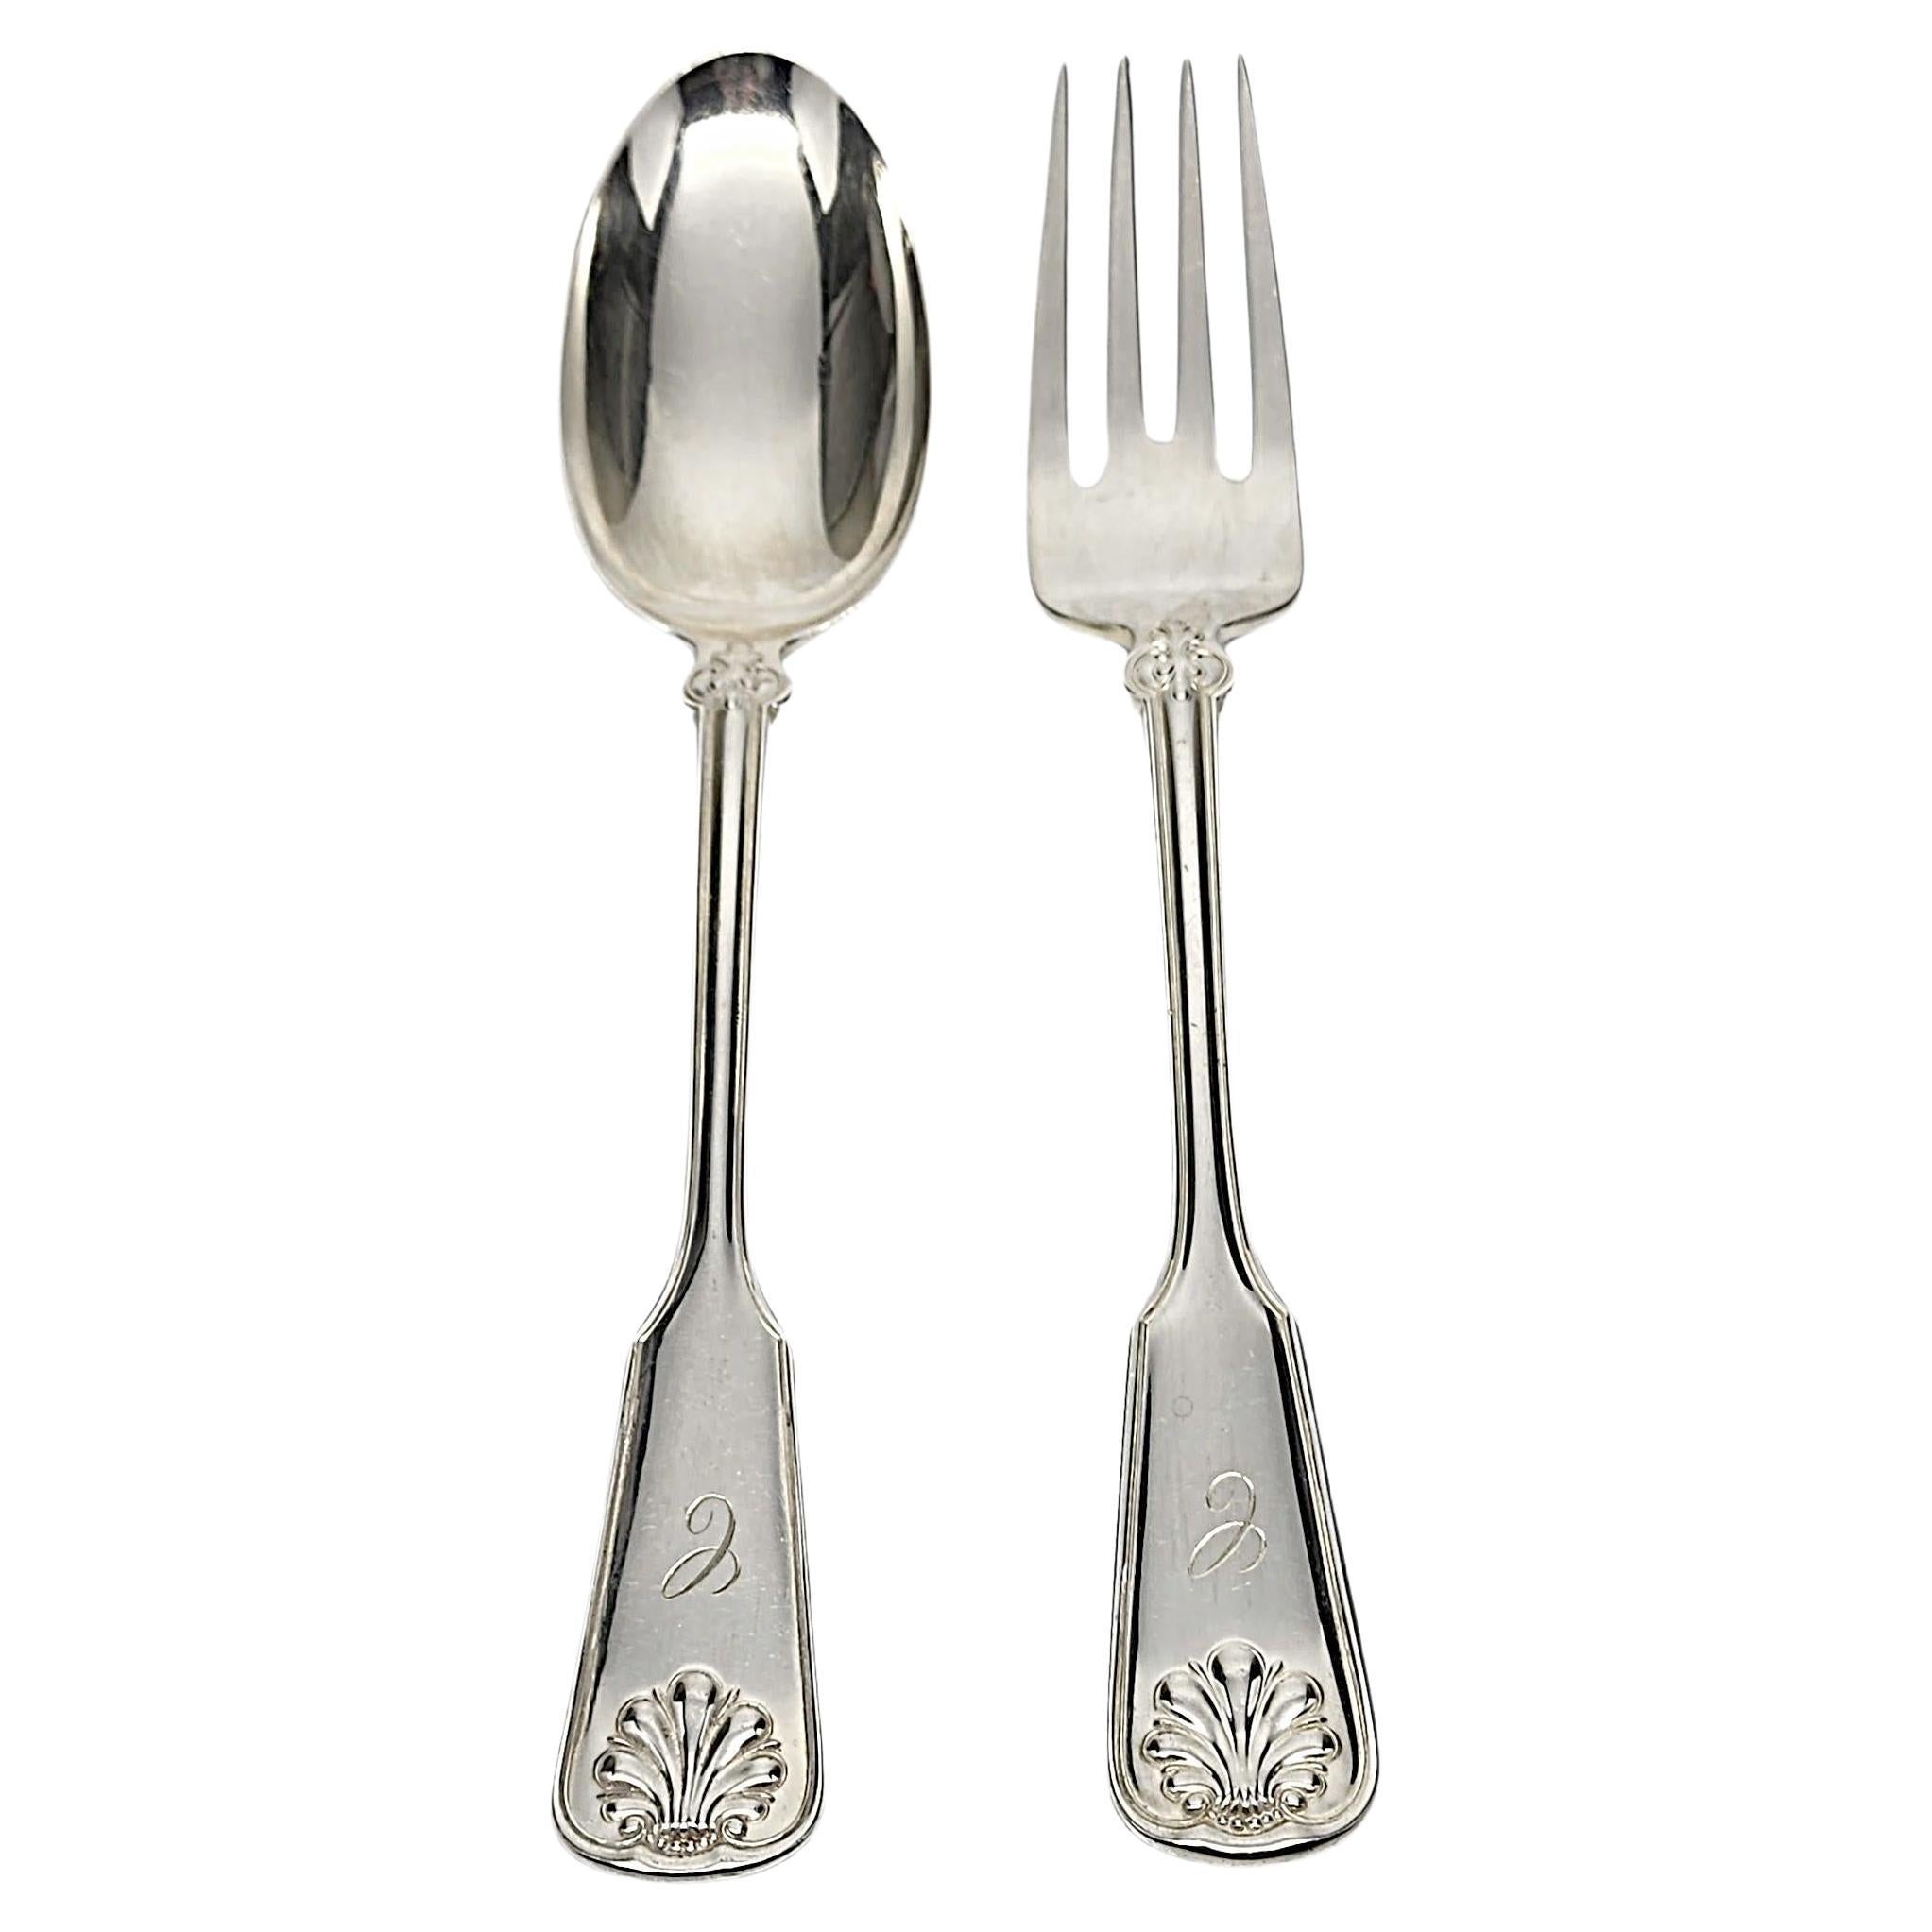 Tiffany & Co Shell Thread Sterling Silver Serving Fork and Spoon w/mono #15396 For Sale